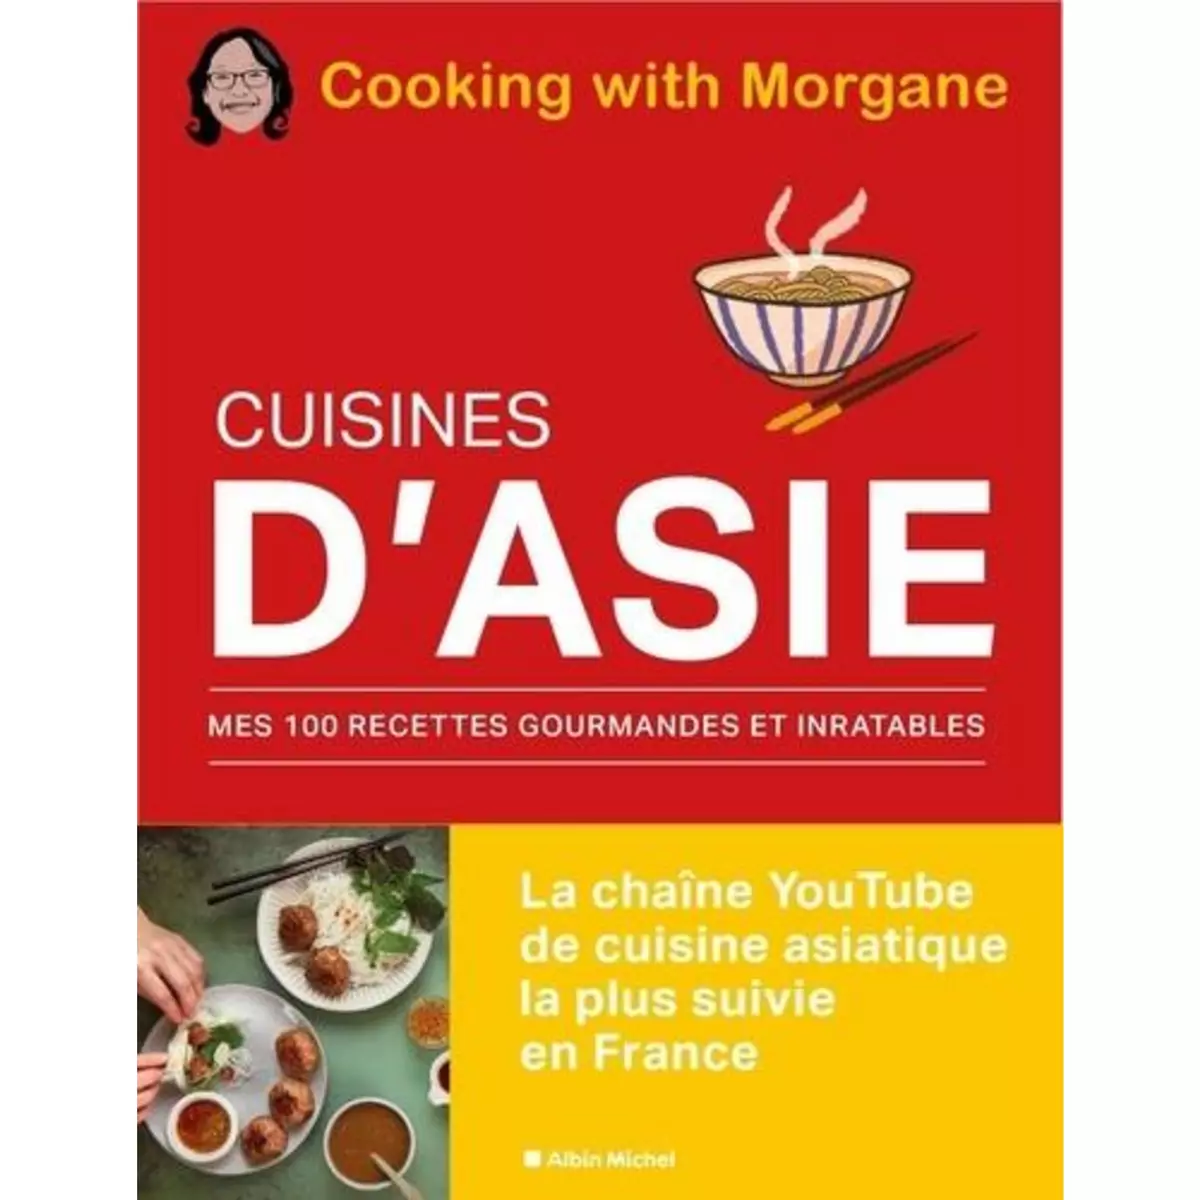  CUISINES D'ASIE. MES 100 RECETTES GOURMANDES ET INRATABLES, Cooking with Morgane